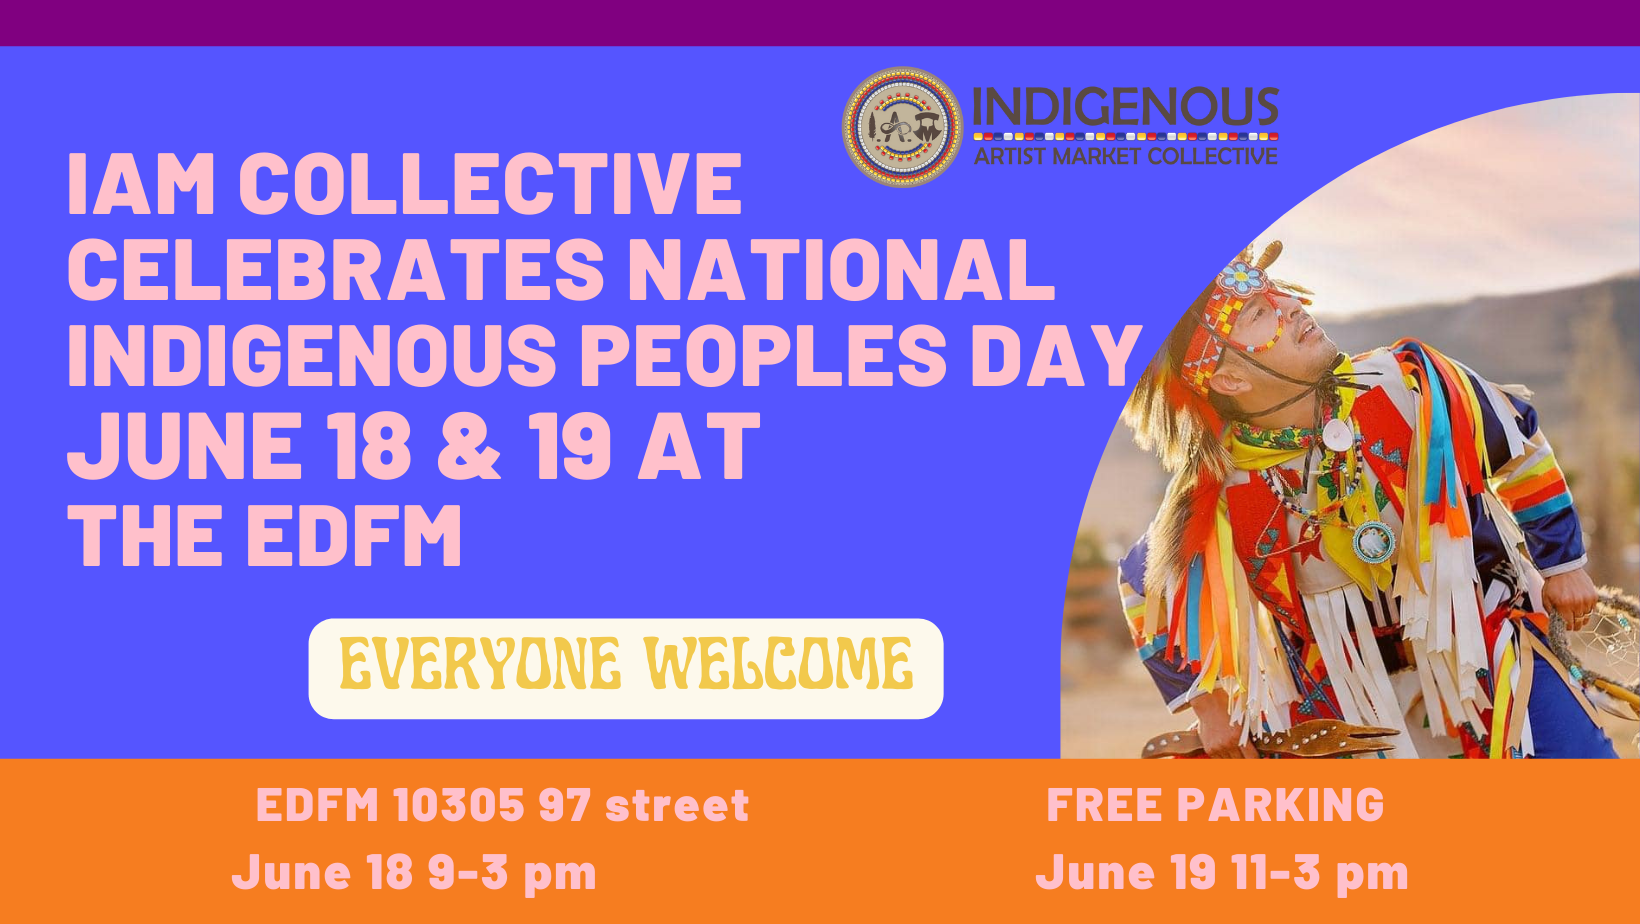 Featured image for “Celebrate National Indigenous Peoples Day with IAM Collective & EDFM”